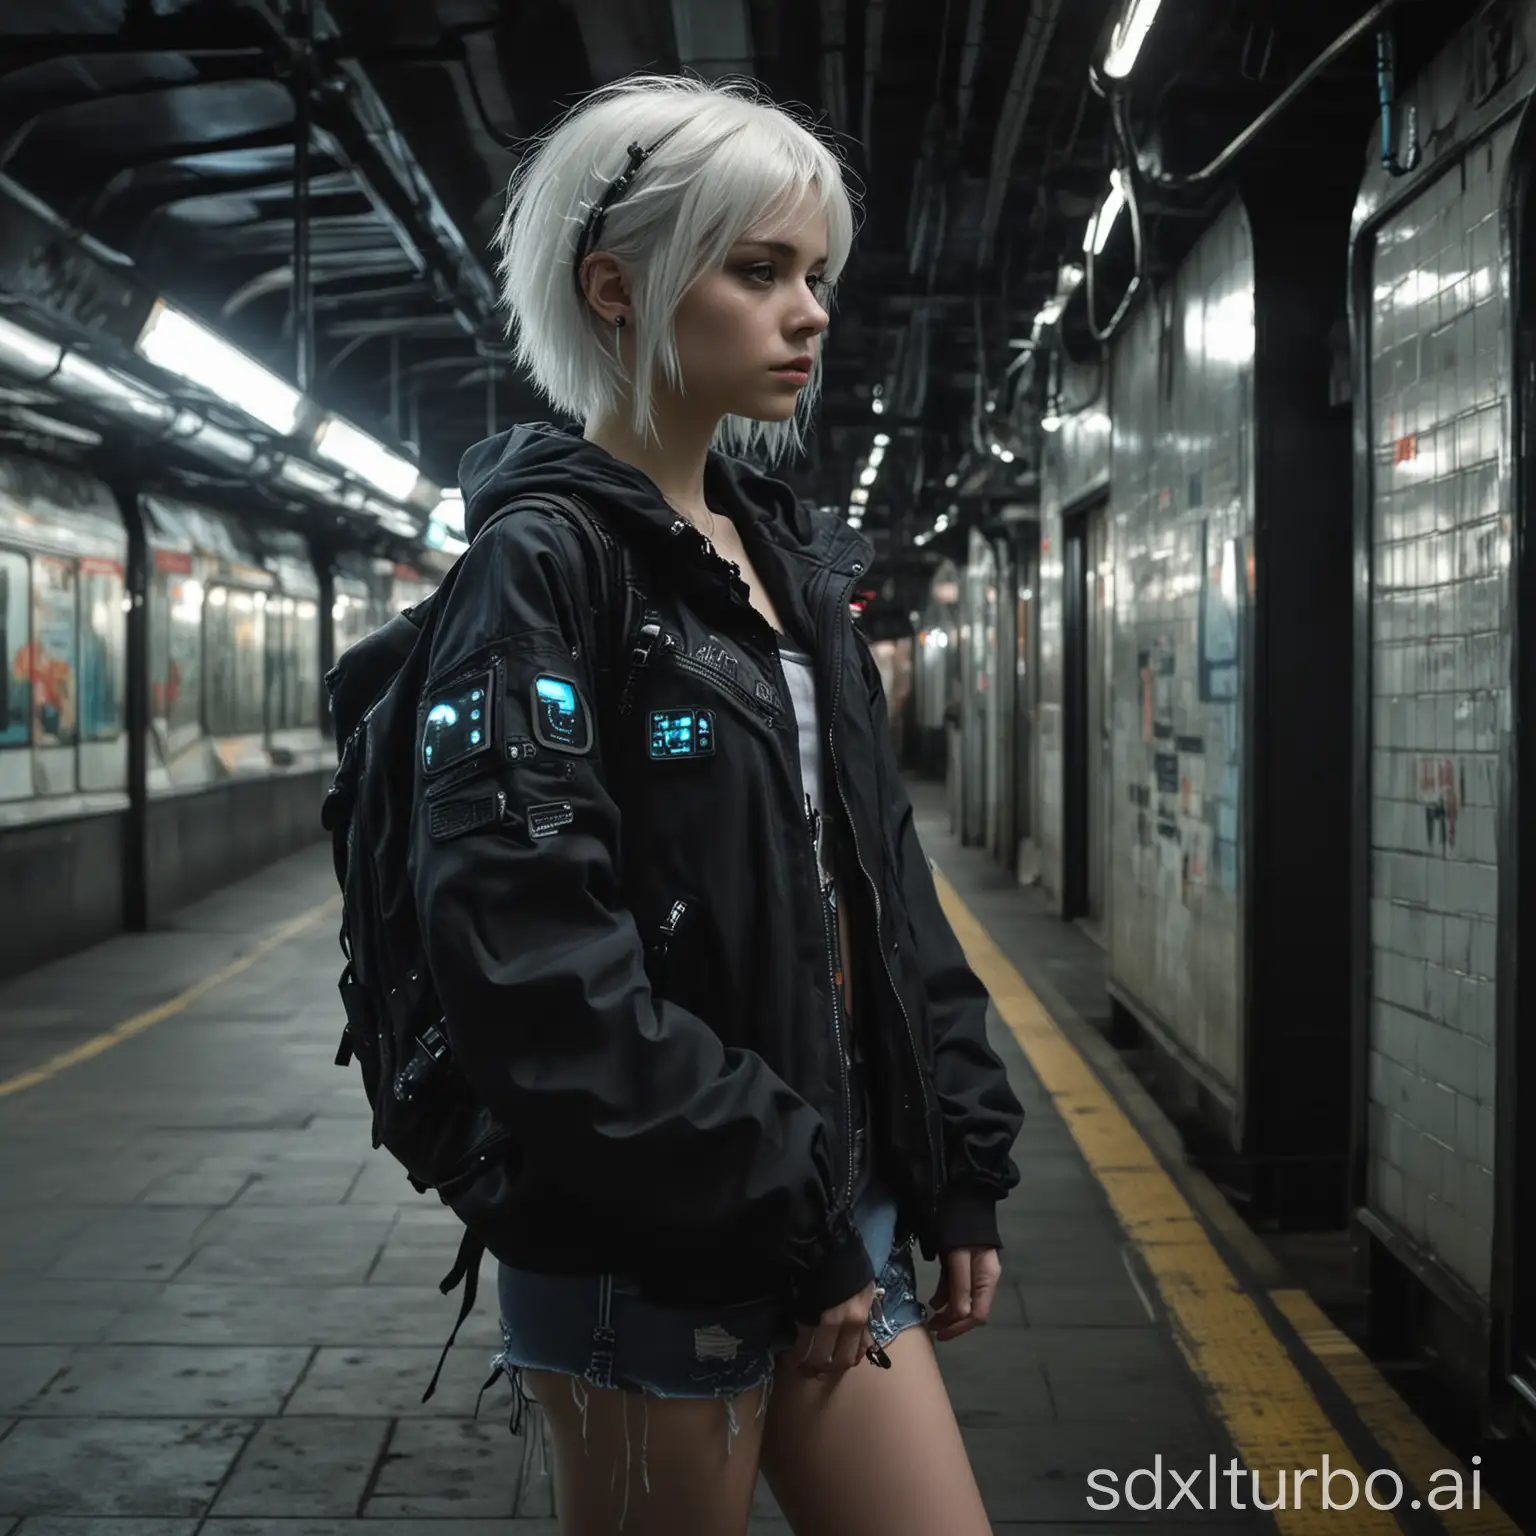 teen femboy hacker, white hair, outfit with bioluminescent details, jacket over crop top, backpack, dystopian cyberpunk subway station, low light, dark shadows